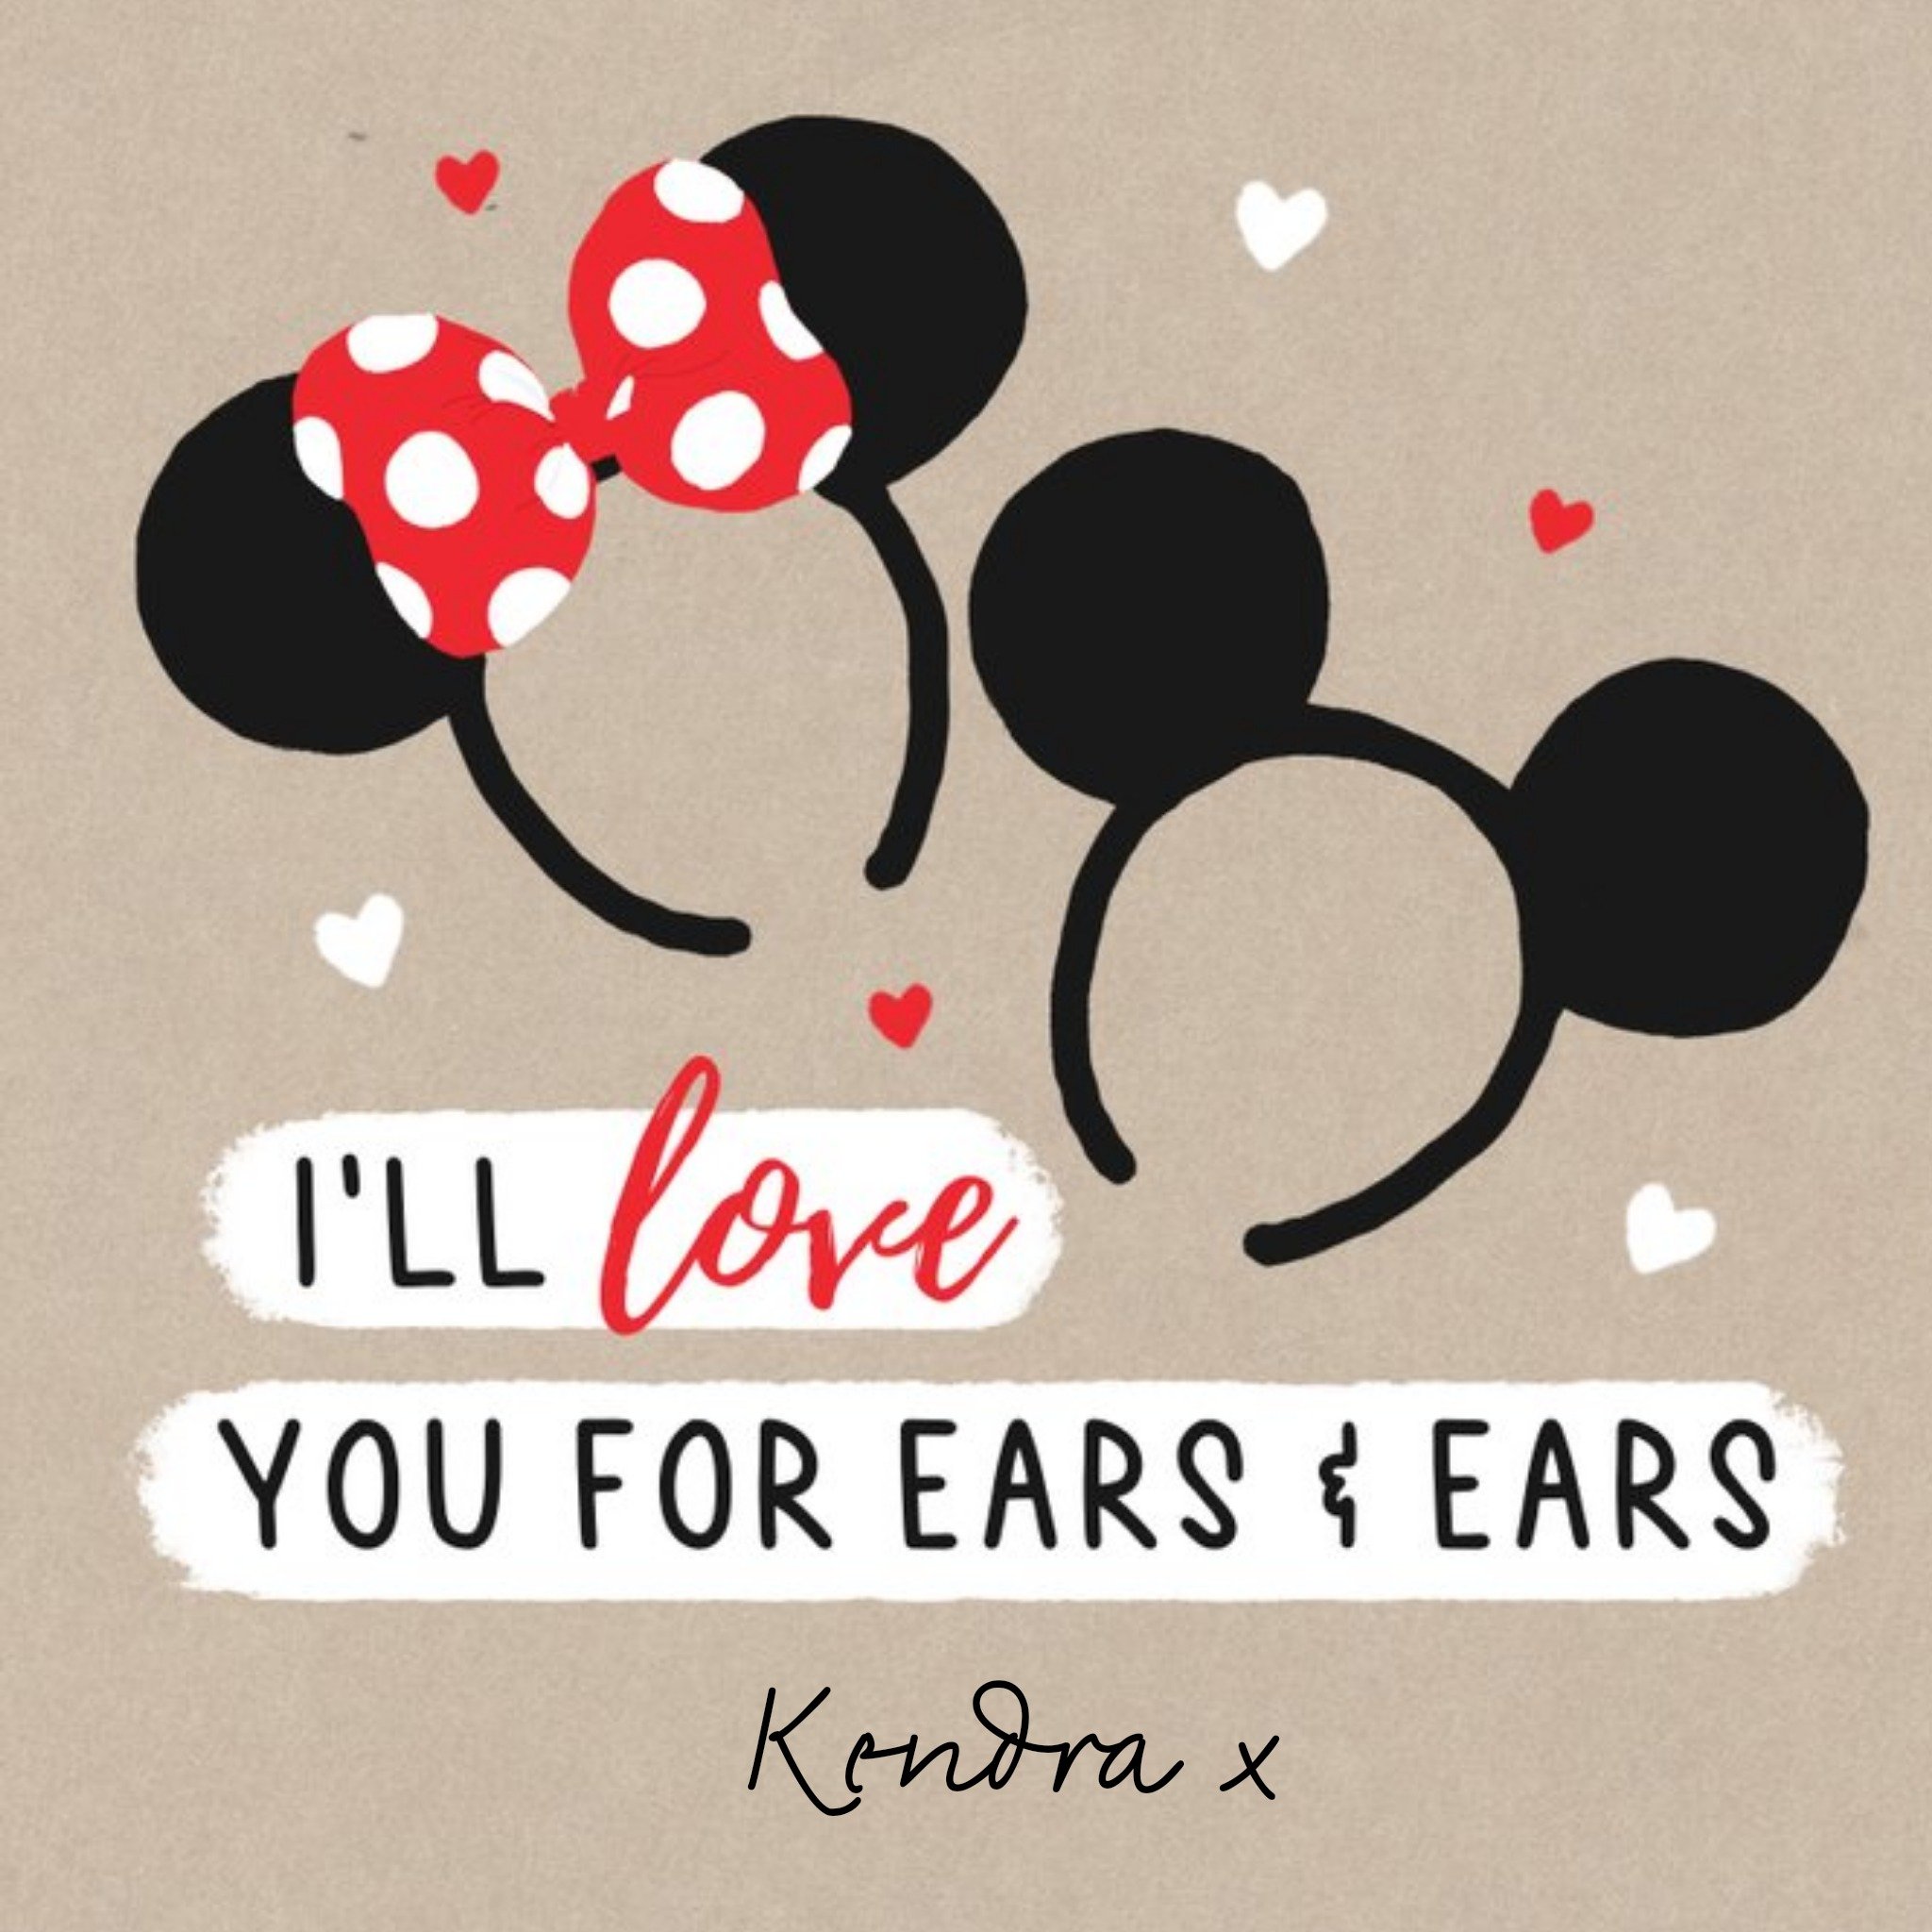 Disney I'll Love You For Ears & Ears Card, Square